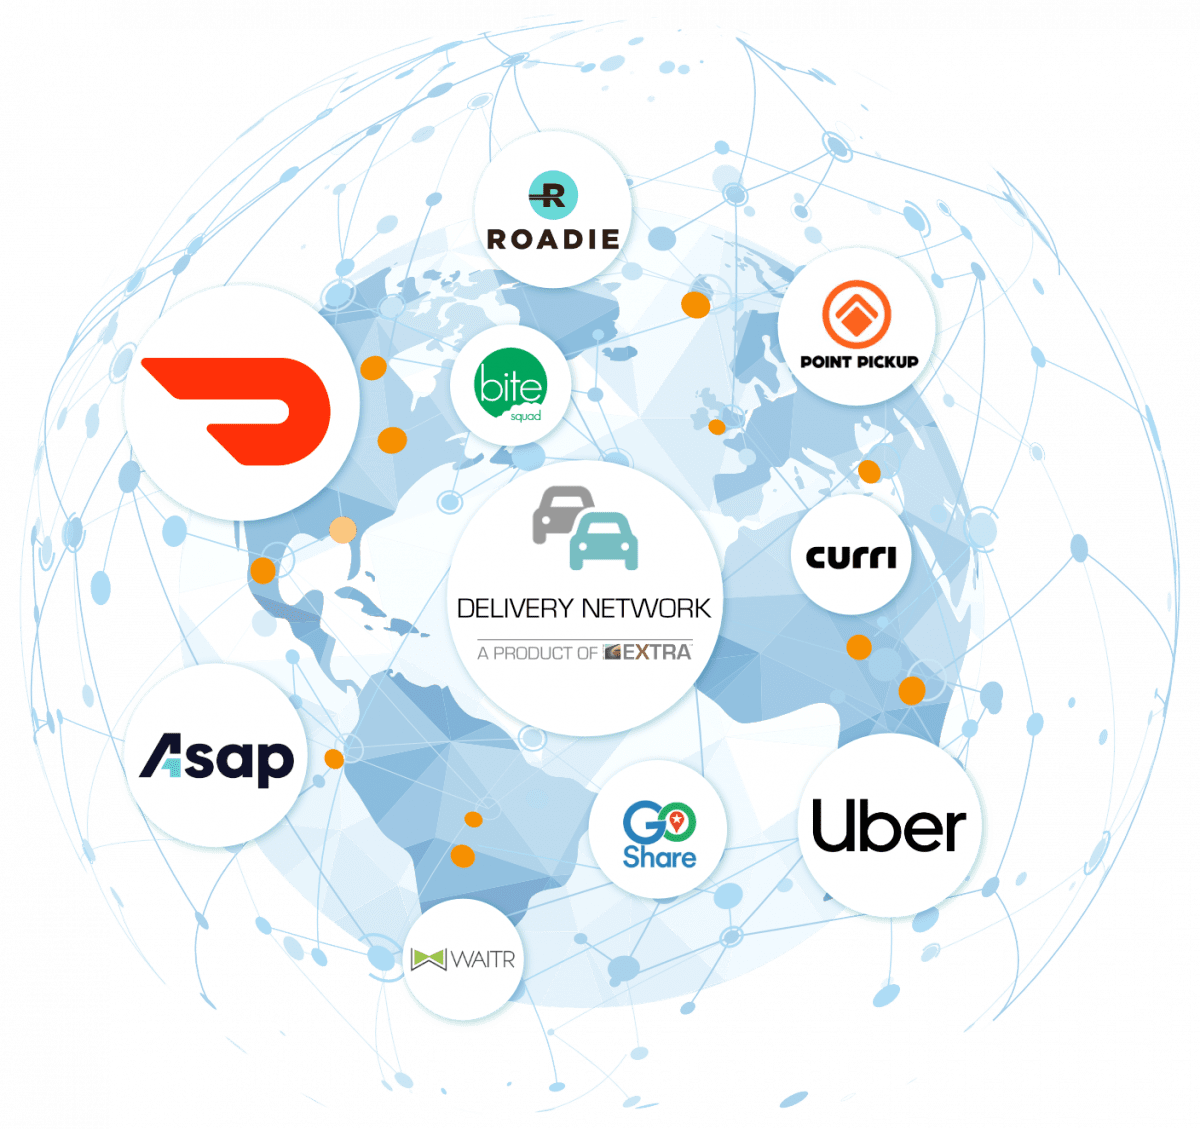 Network cloud of Delivery Network provider logos